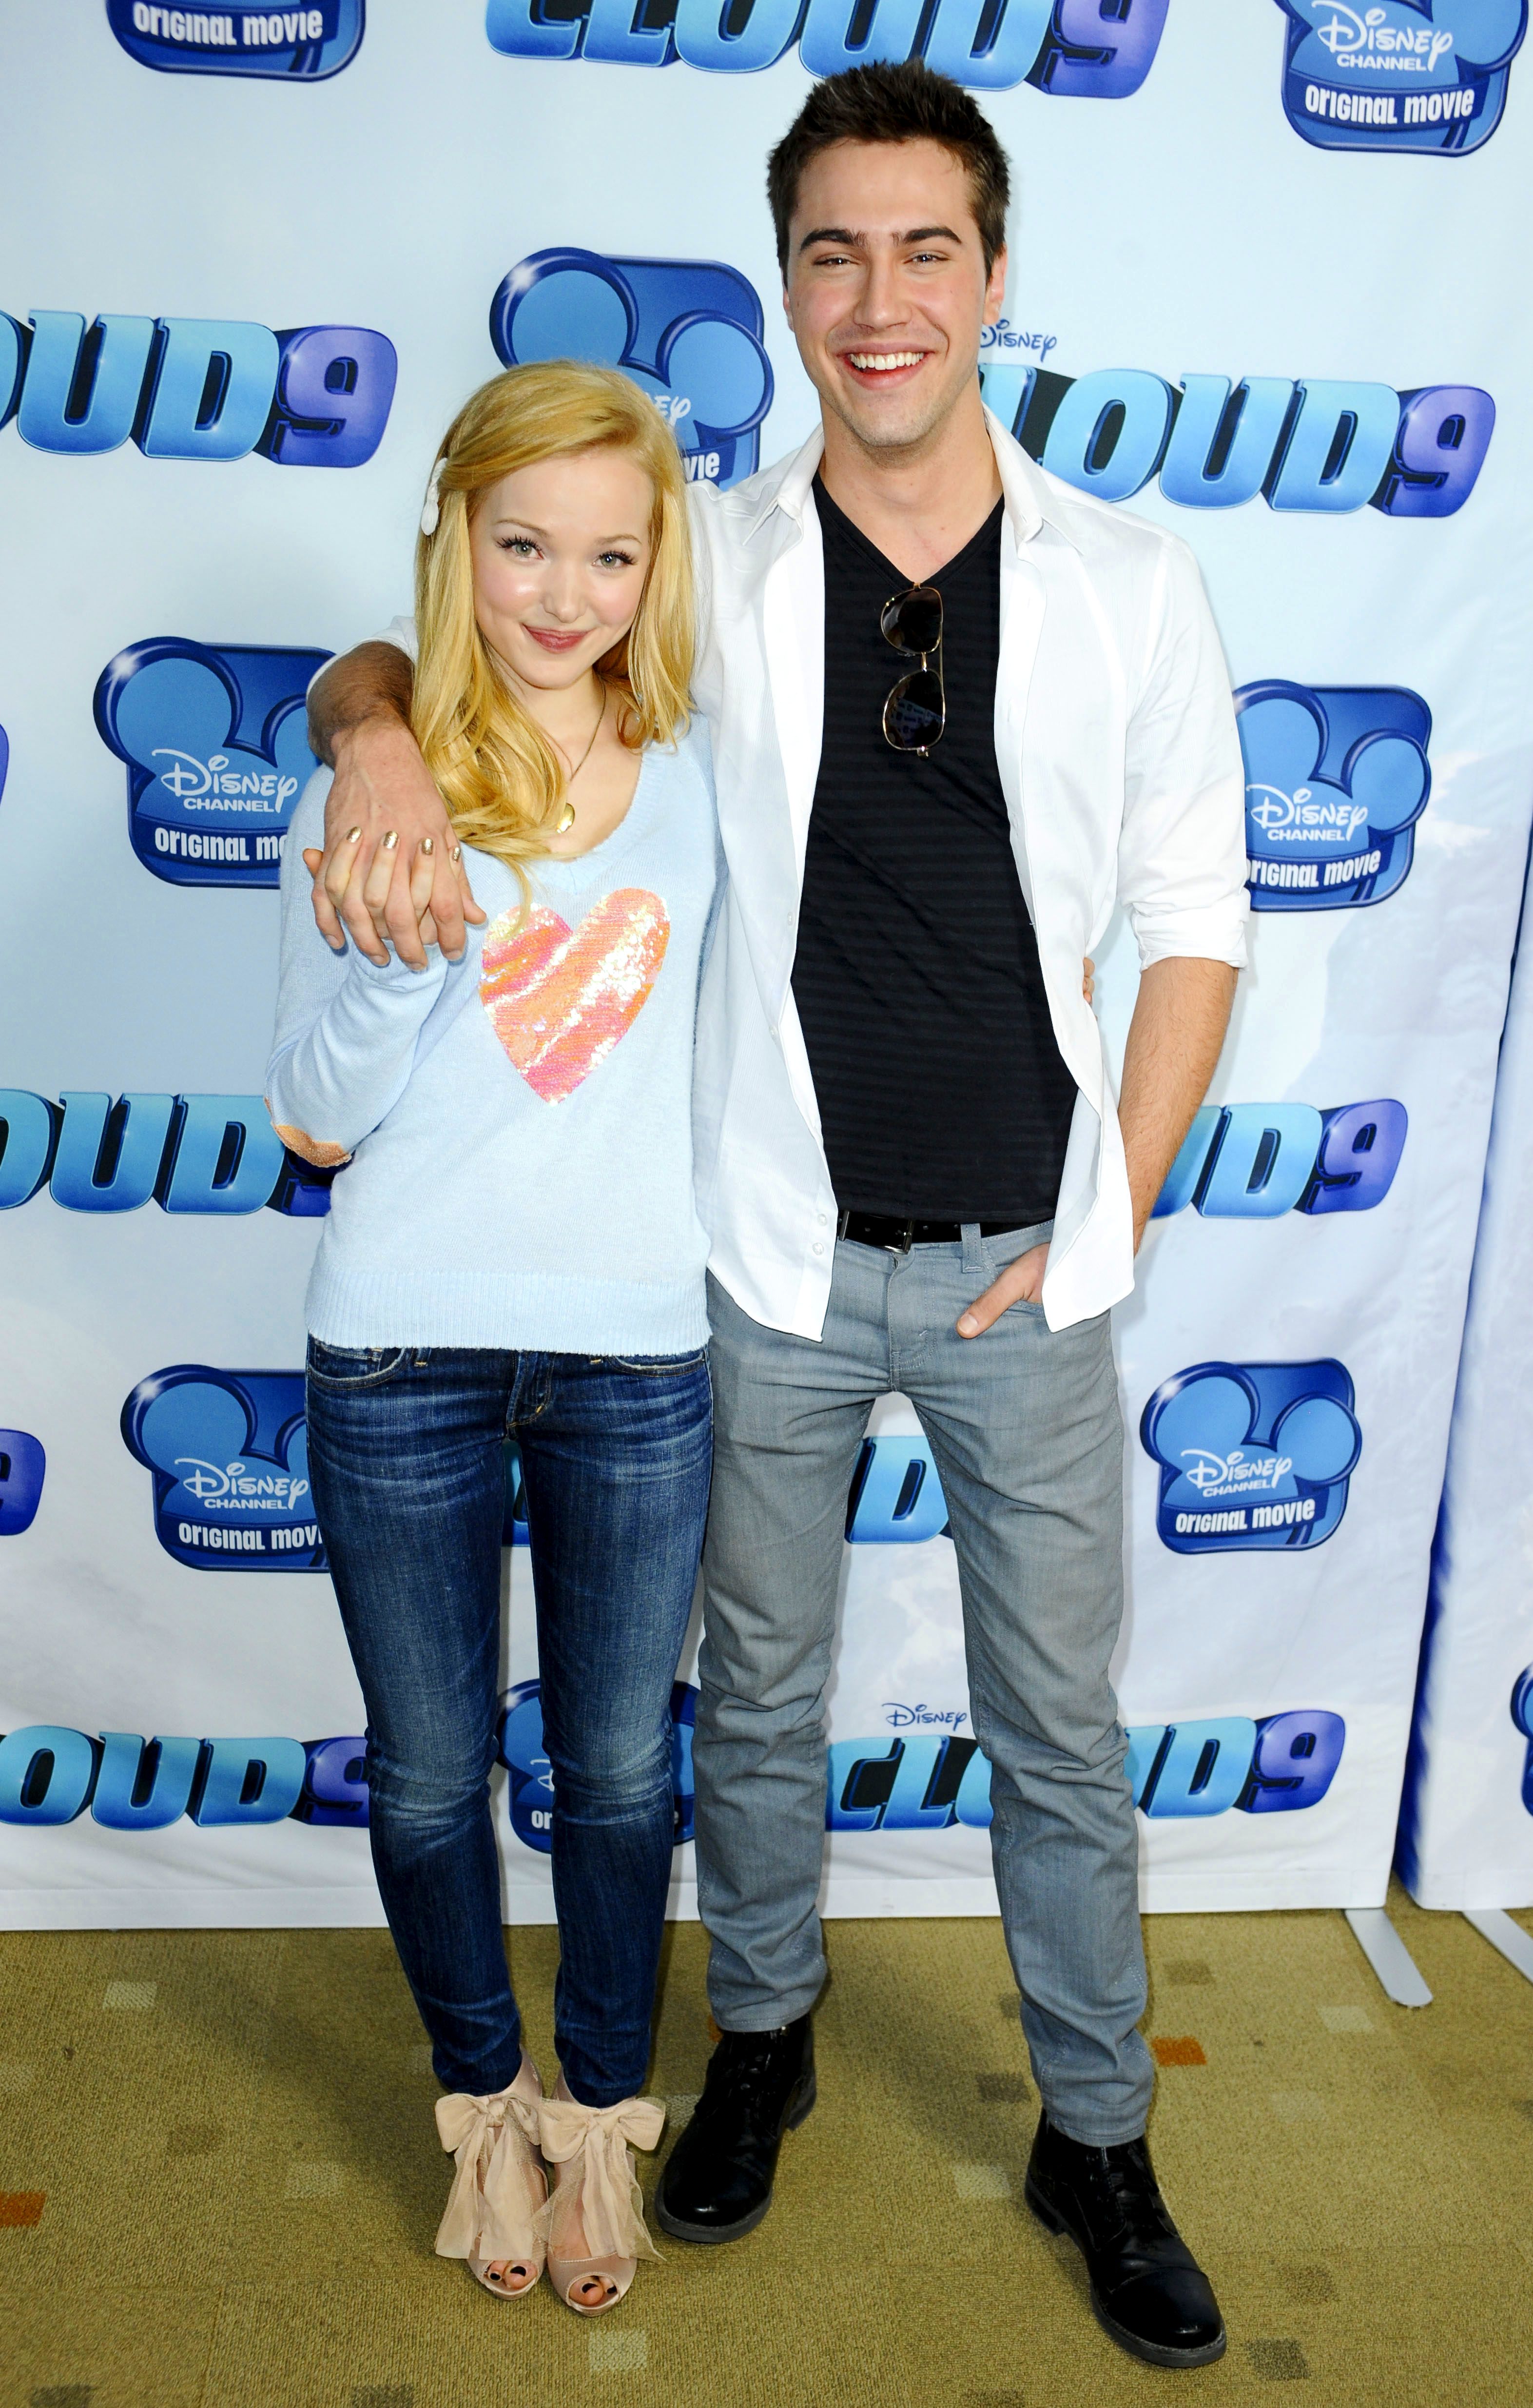 How Tall Is Dove Cameron? Height, Photos With Other Stars